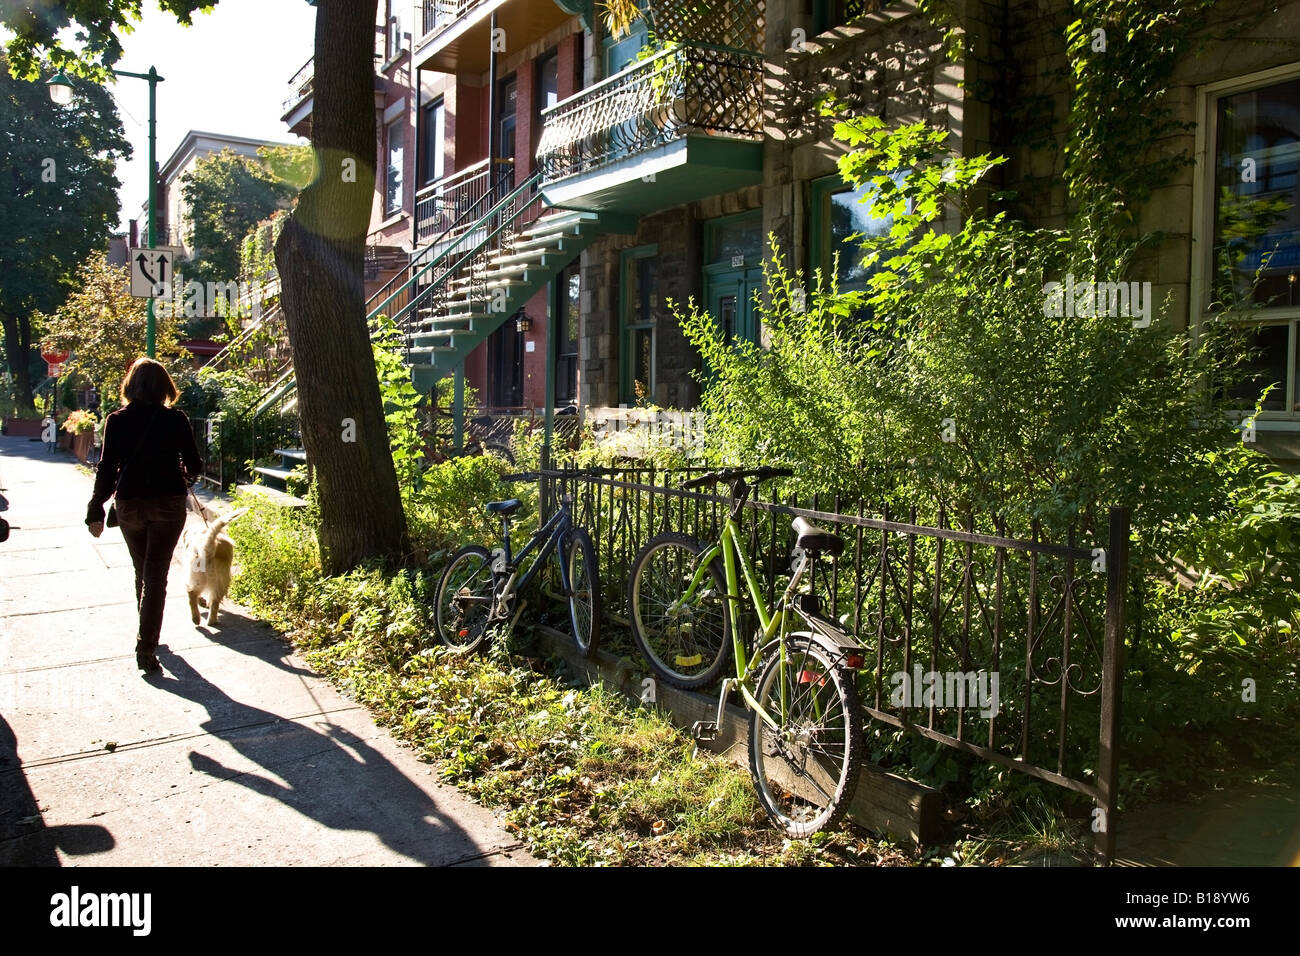 Typical 'brownstone' house in Fairmont district, Montreal, Canada. Stock Photo